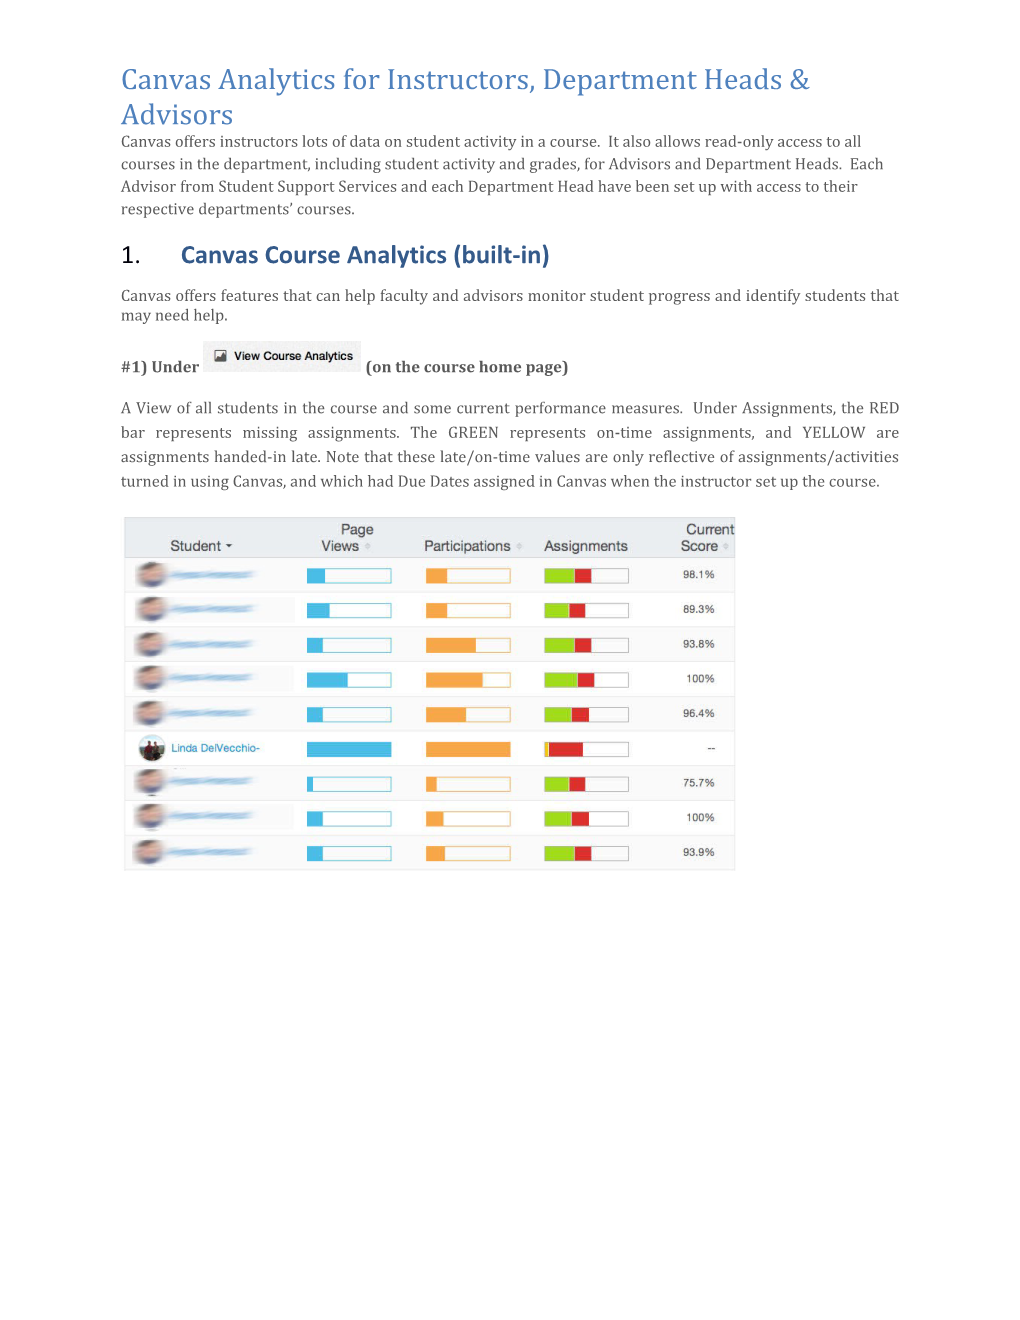 Canvas Course Analytics (Built-In)